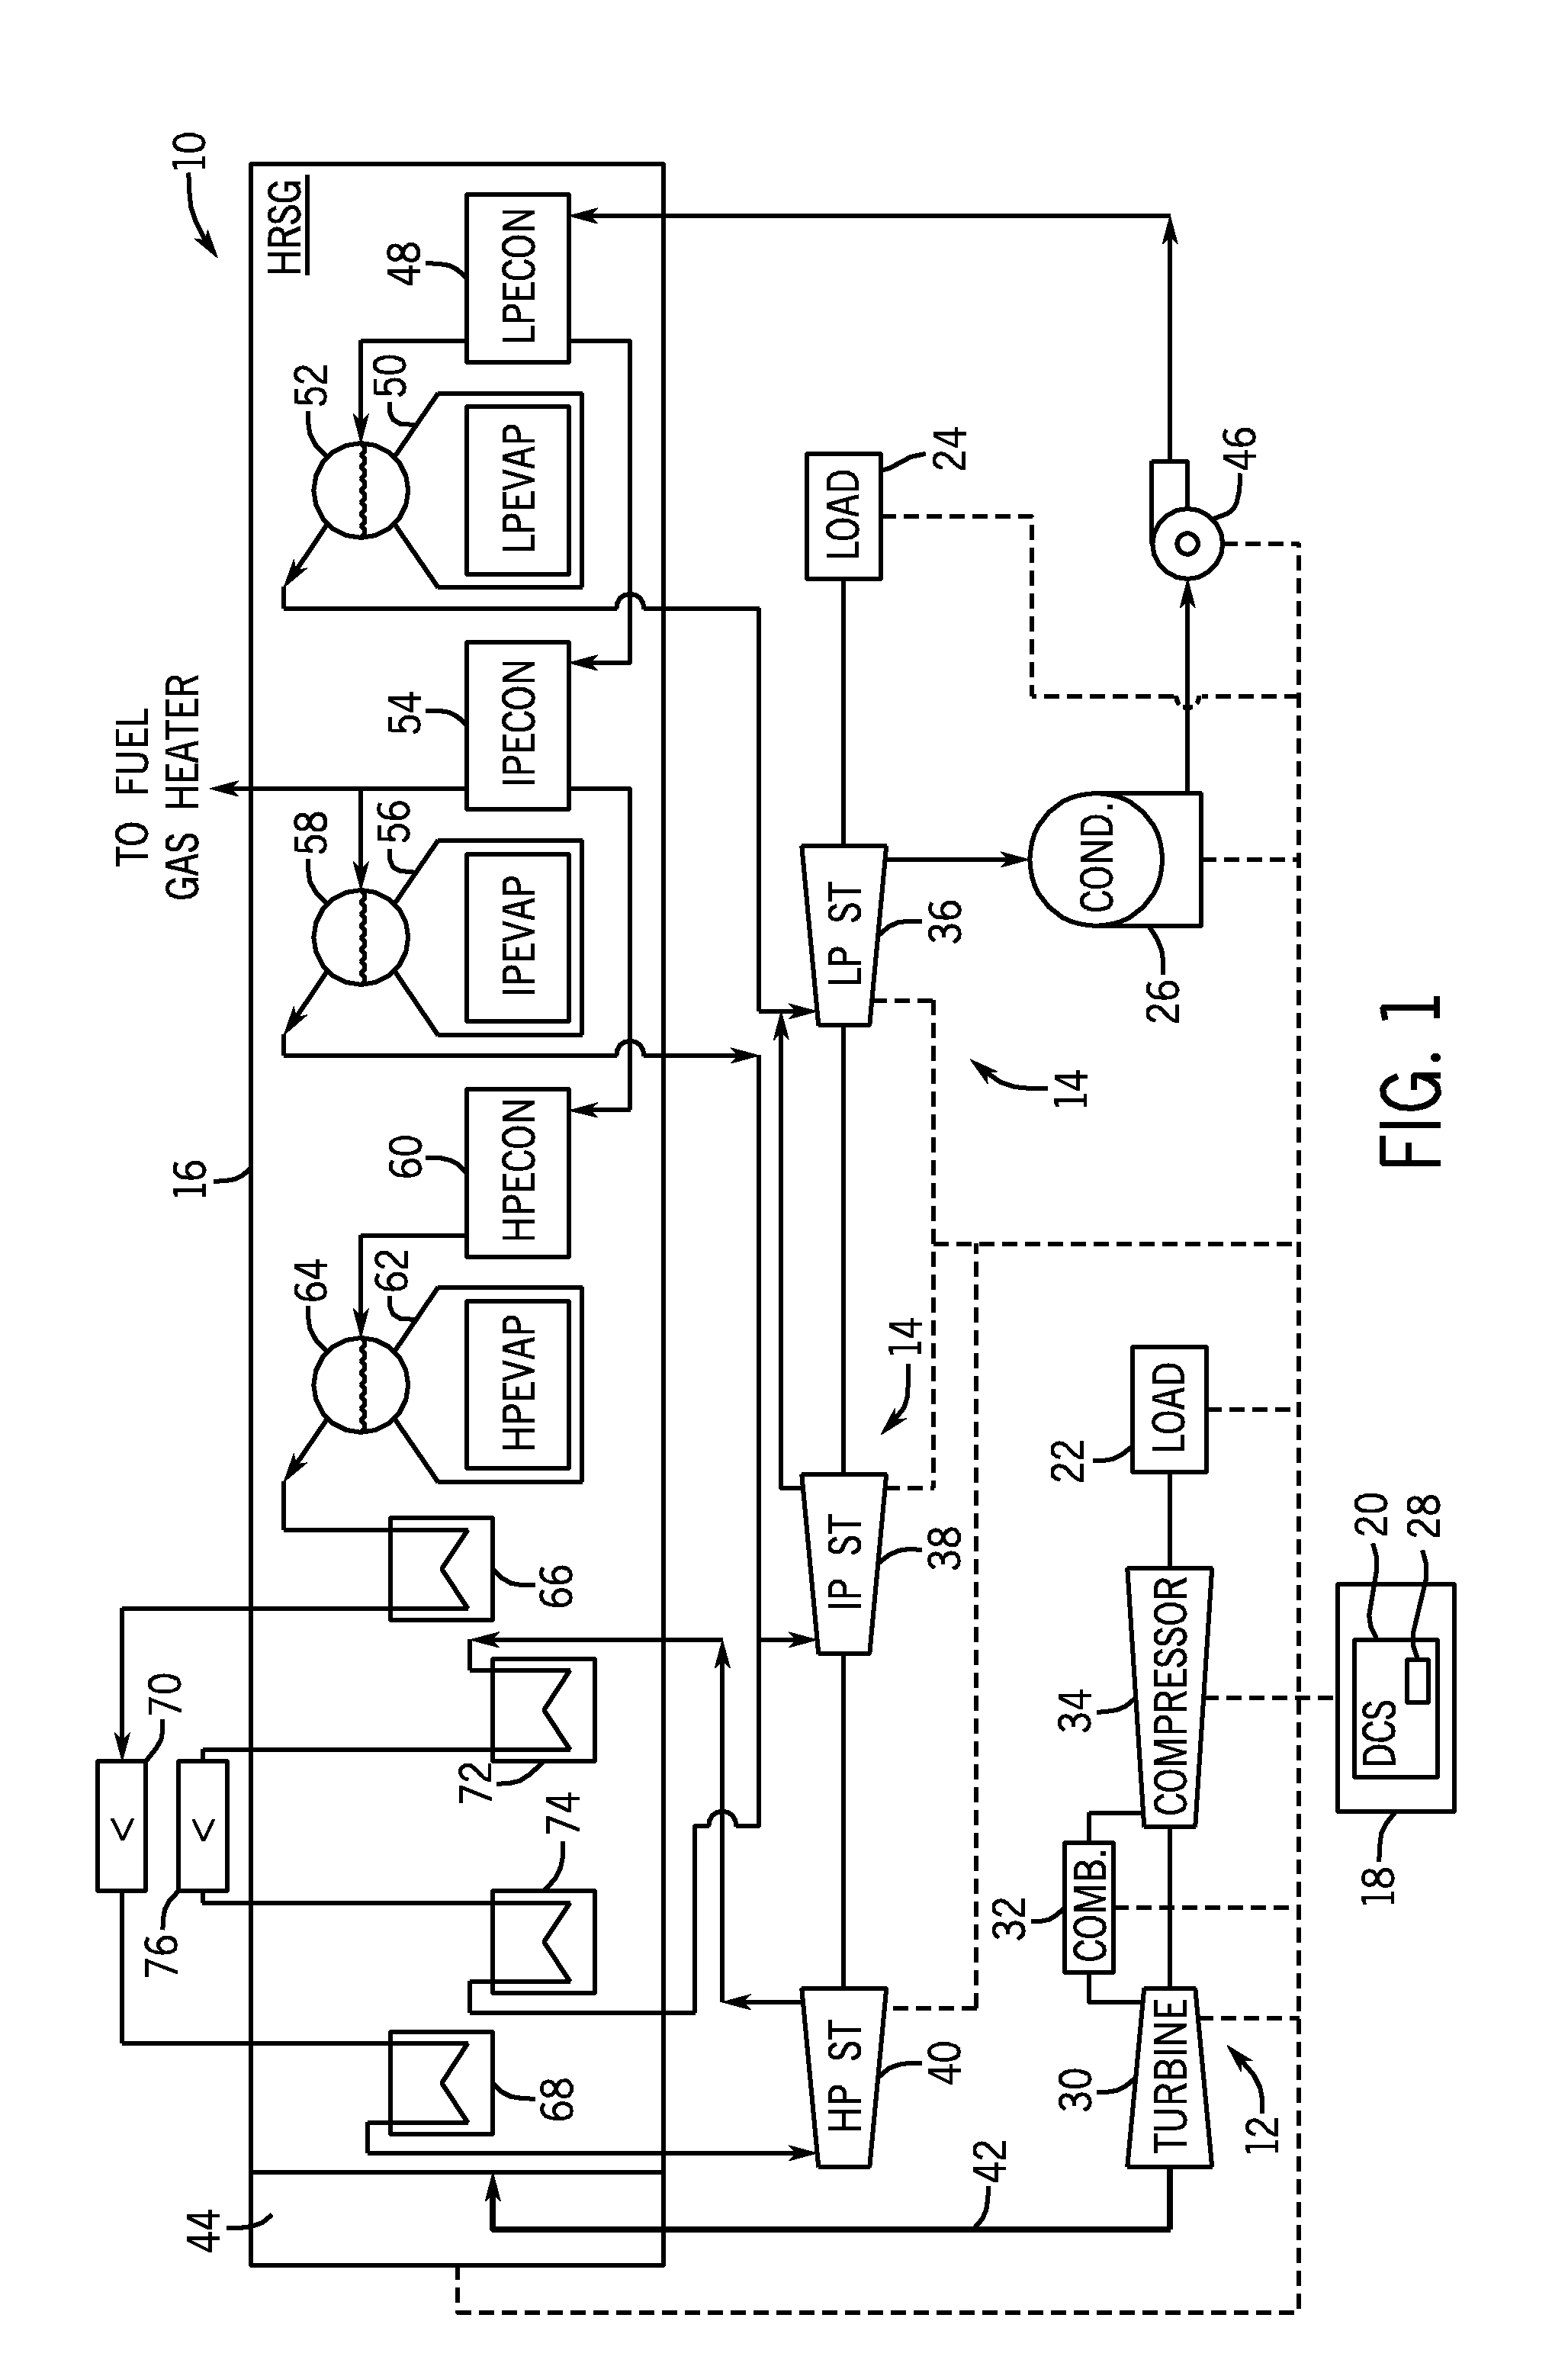 Systems and methods for heat recovery steam generation optimization